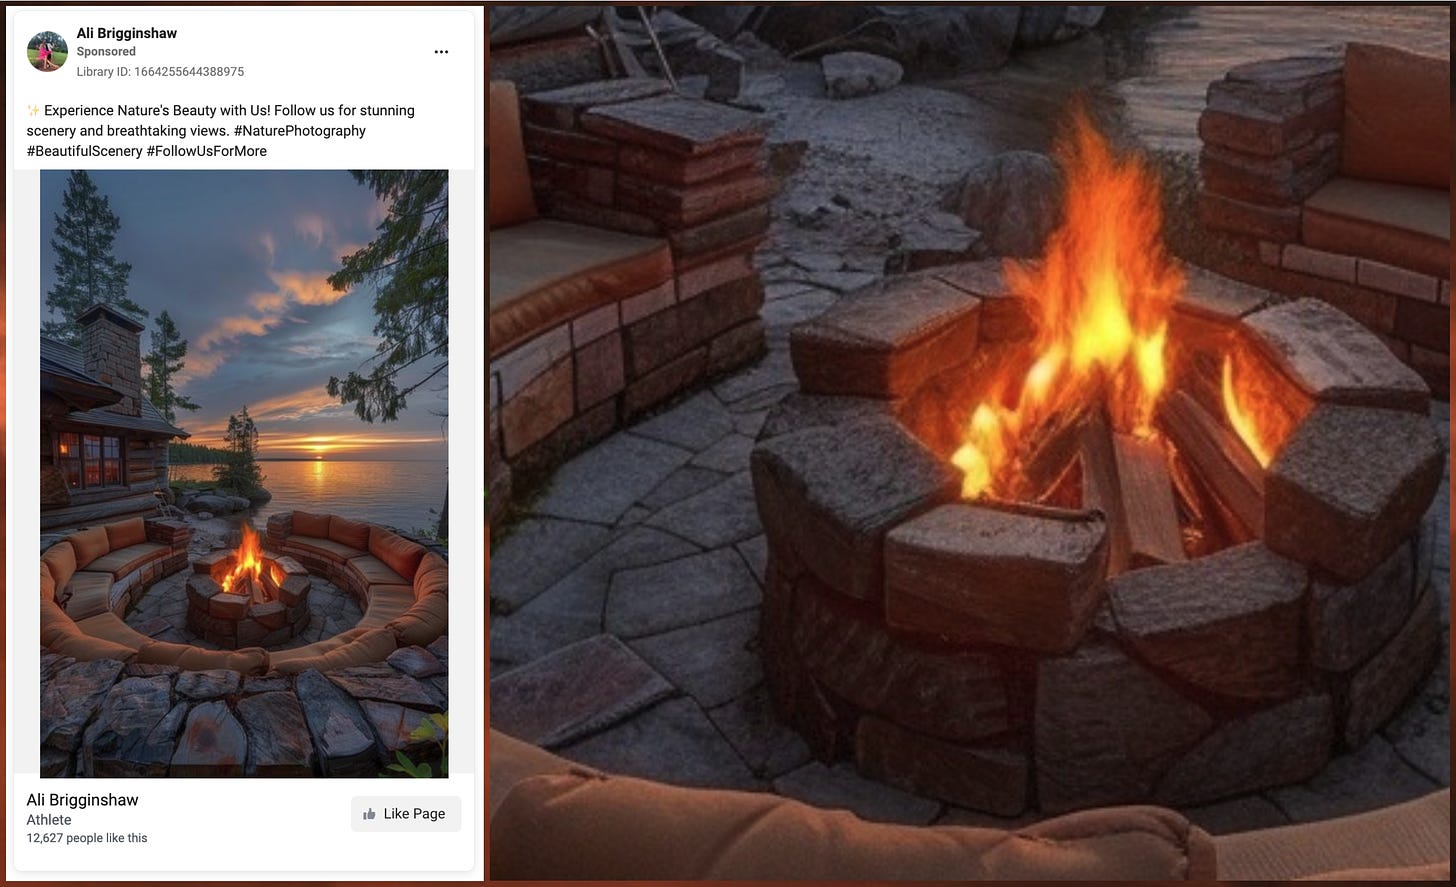 screenshot of a Facebook ad from "Ali Brigginshaw" containing an AI-generated image, and a closeup showing anomalies in the campfire